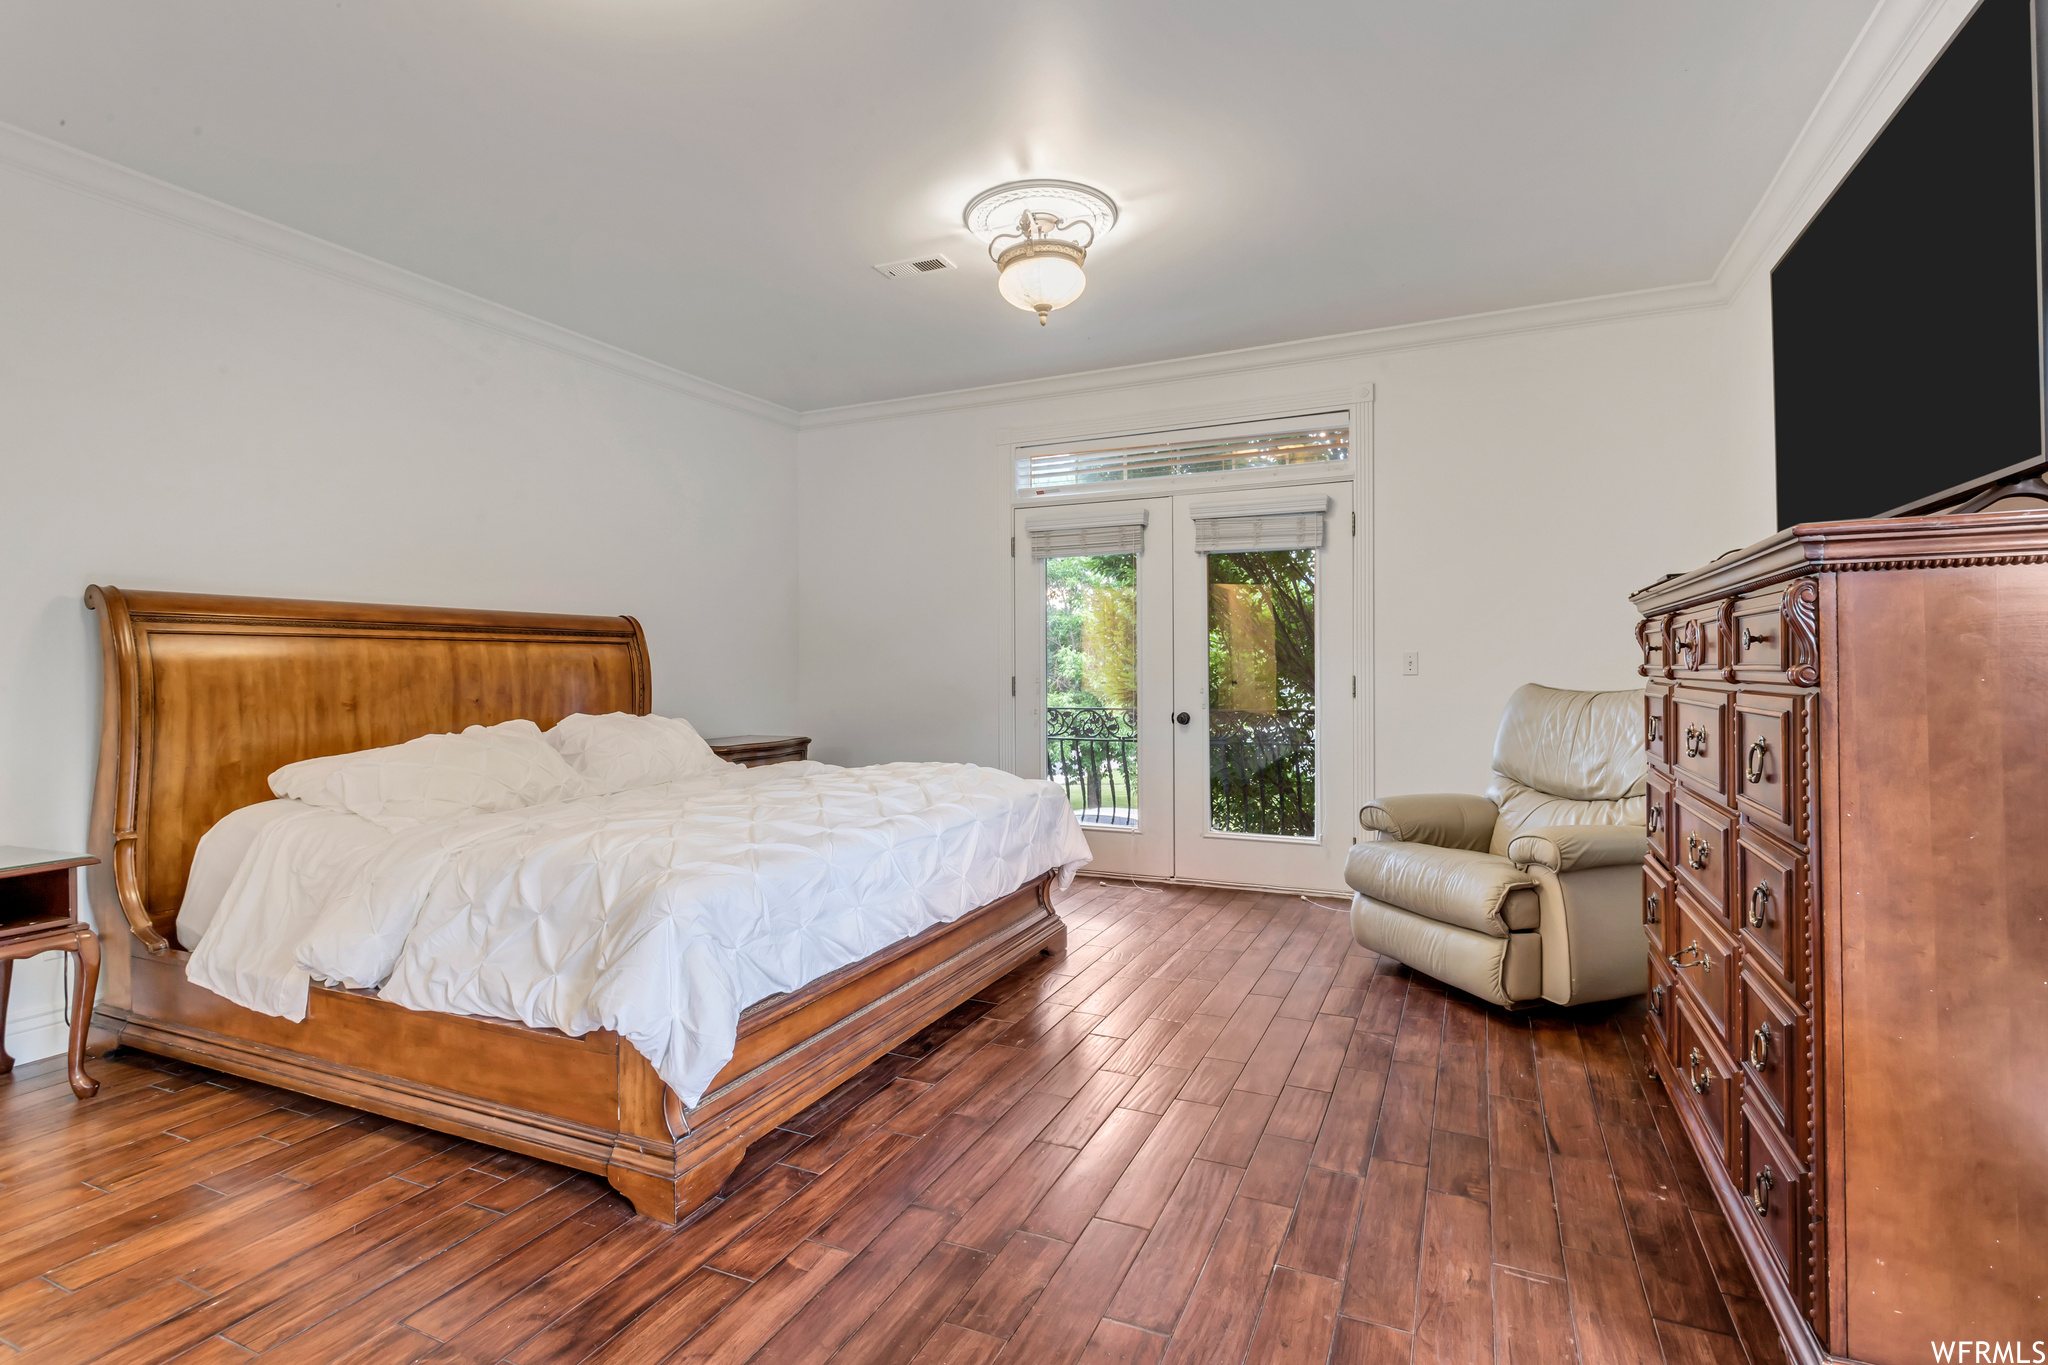 Hardwood floored bedroom with ornamental molding and french doors